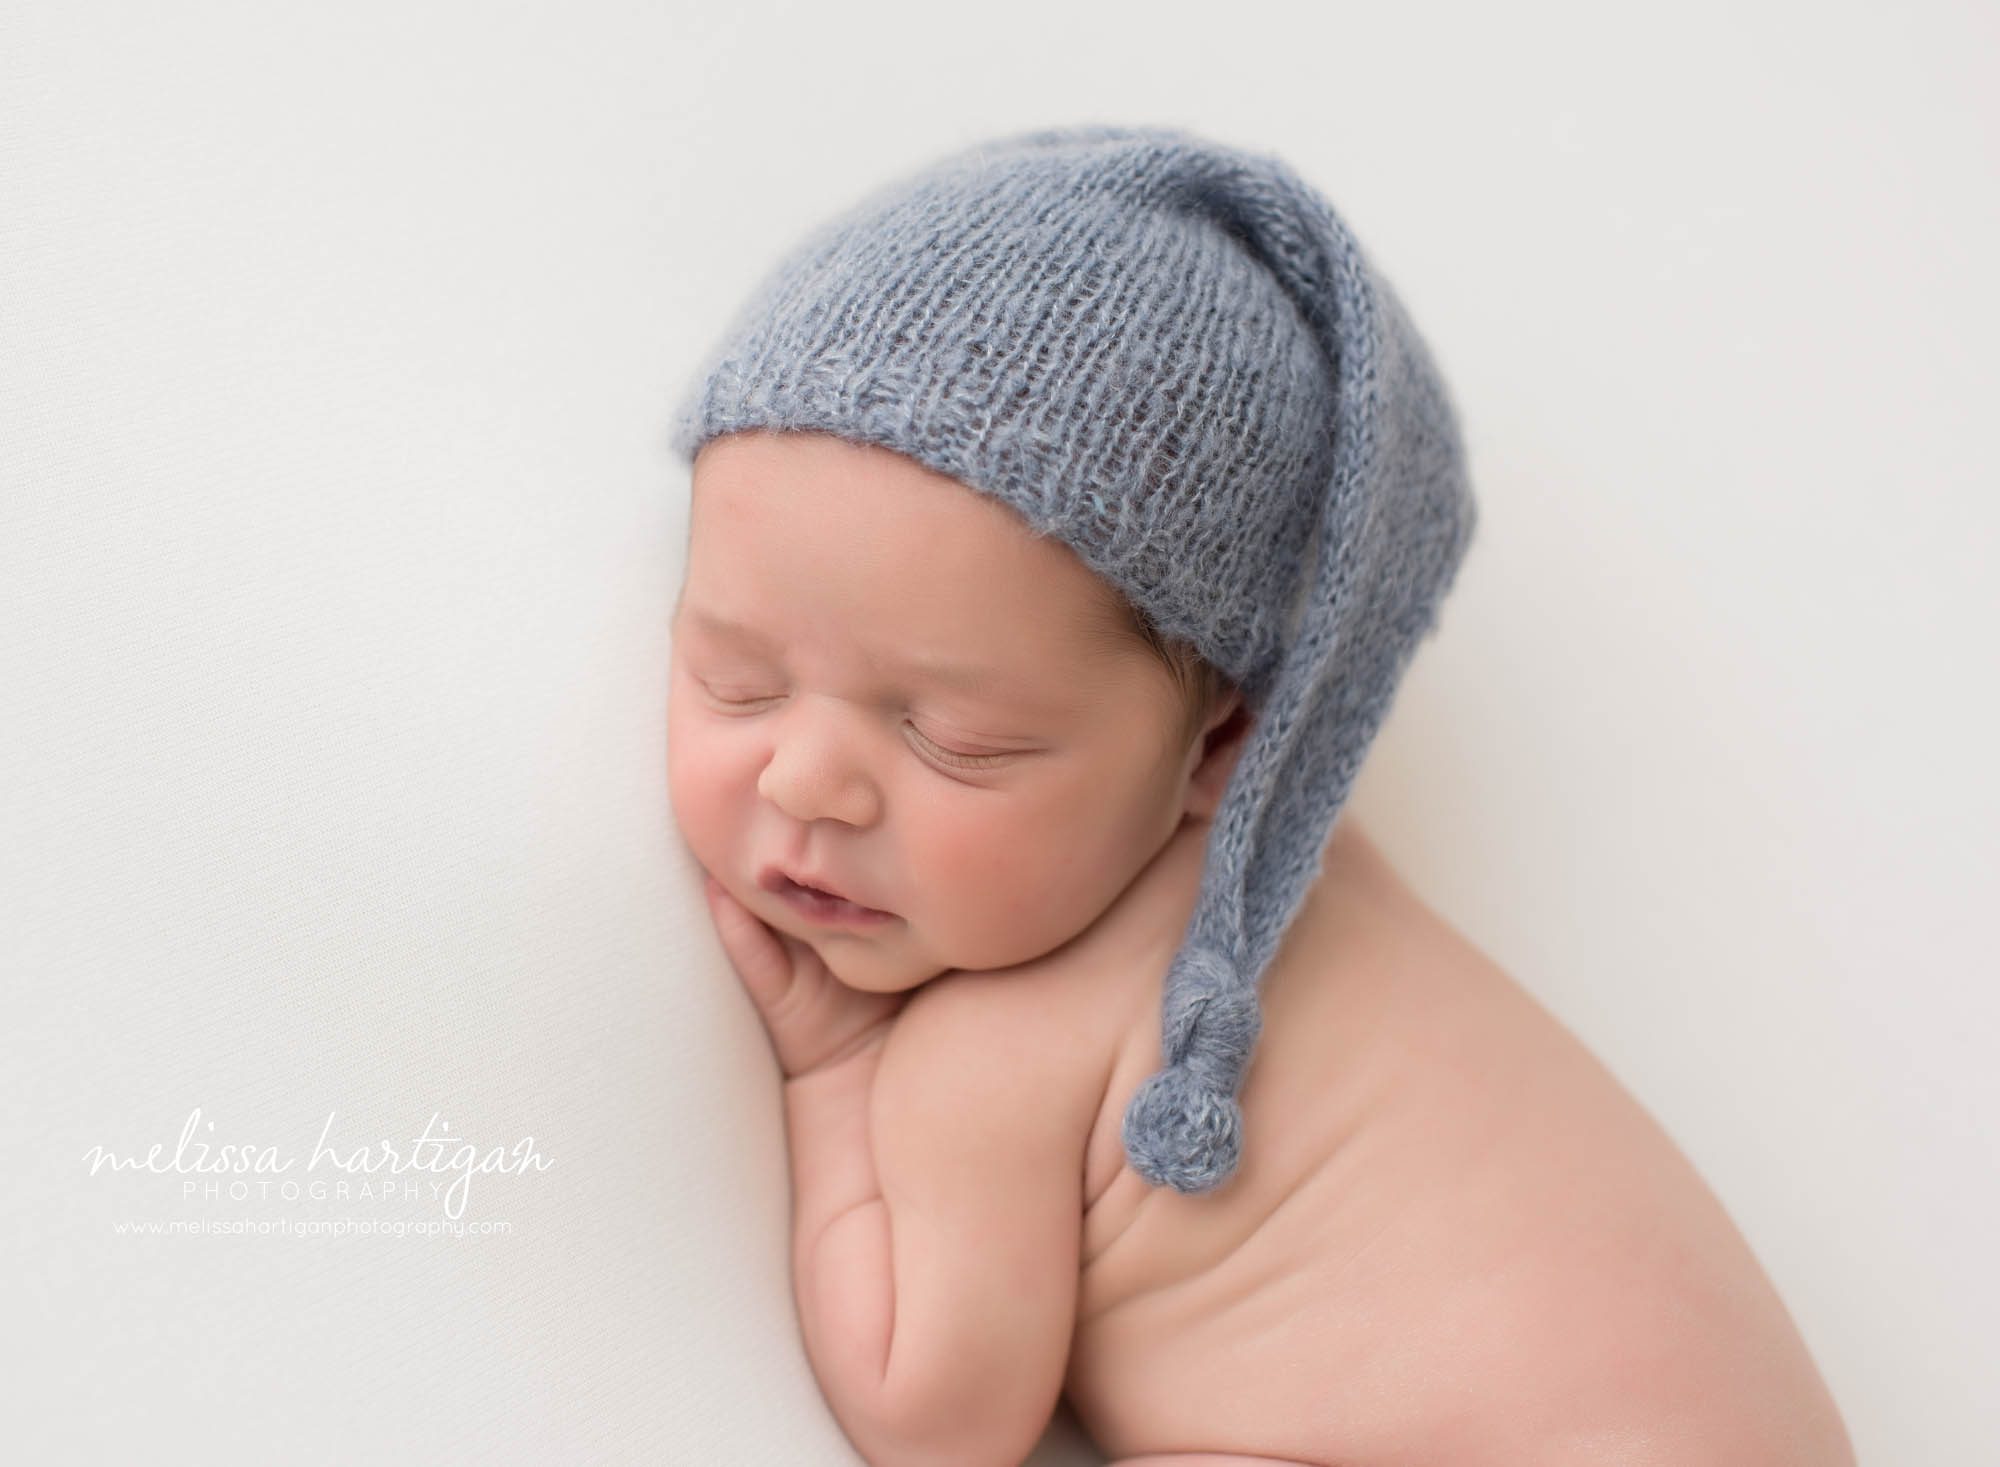 Newborn baby boy posed on side with knitted blue sleepy cap